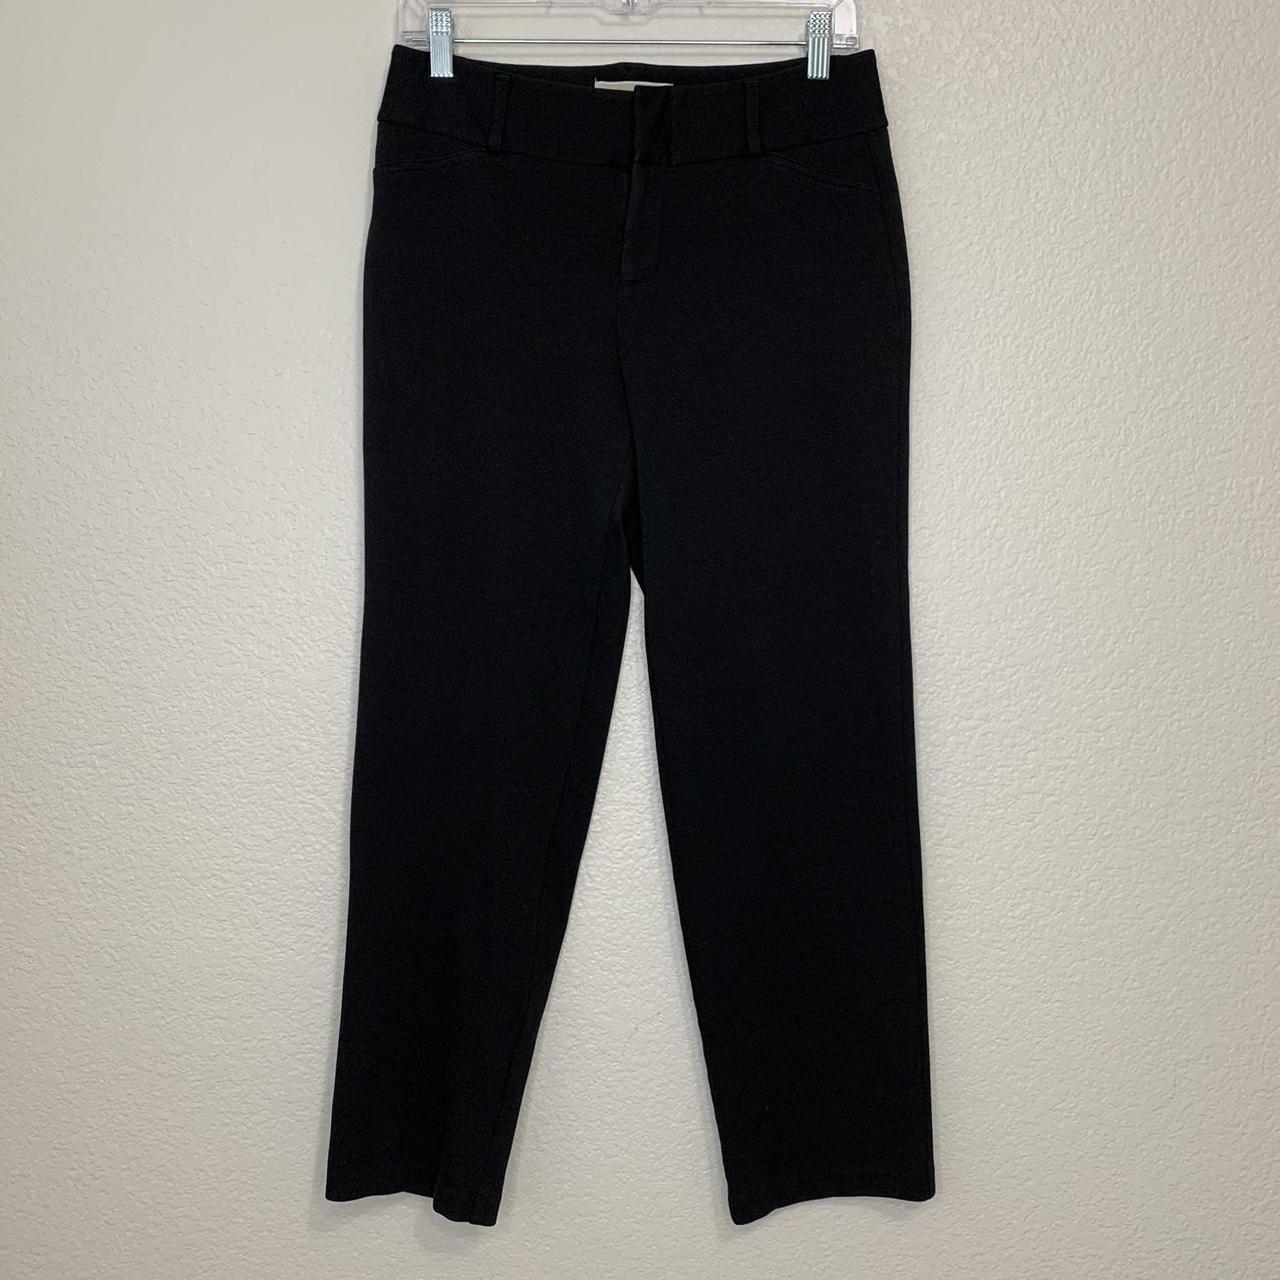 Michael Kors Outlet: pants for woman - Black | Michael Kors pants  MS3330GM8AP online at GIGLIO.COM